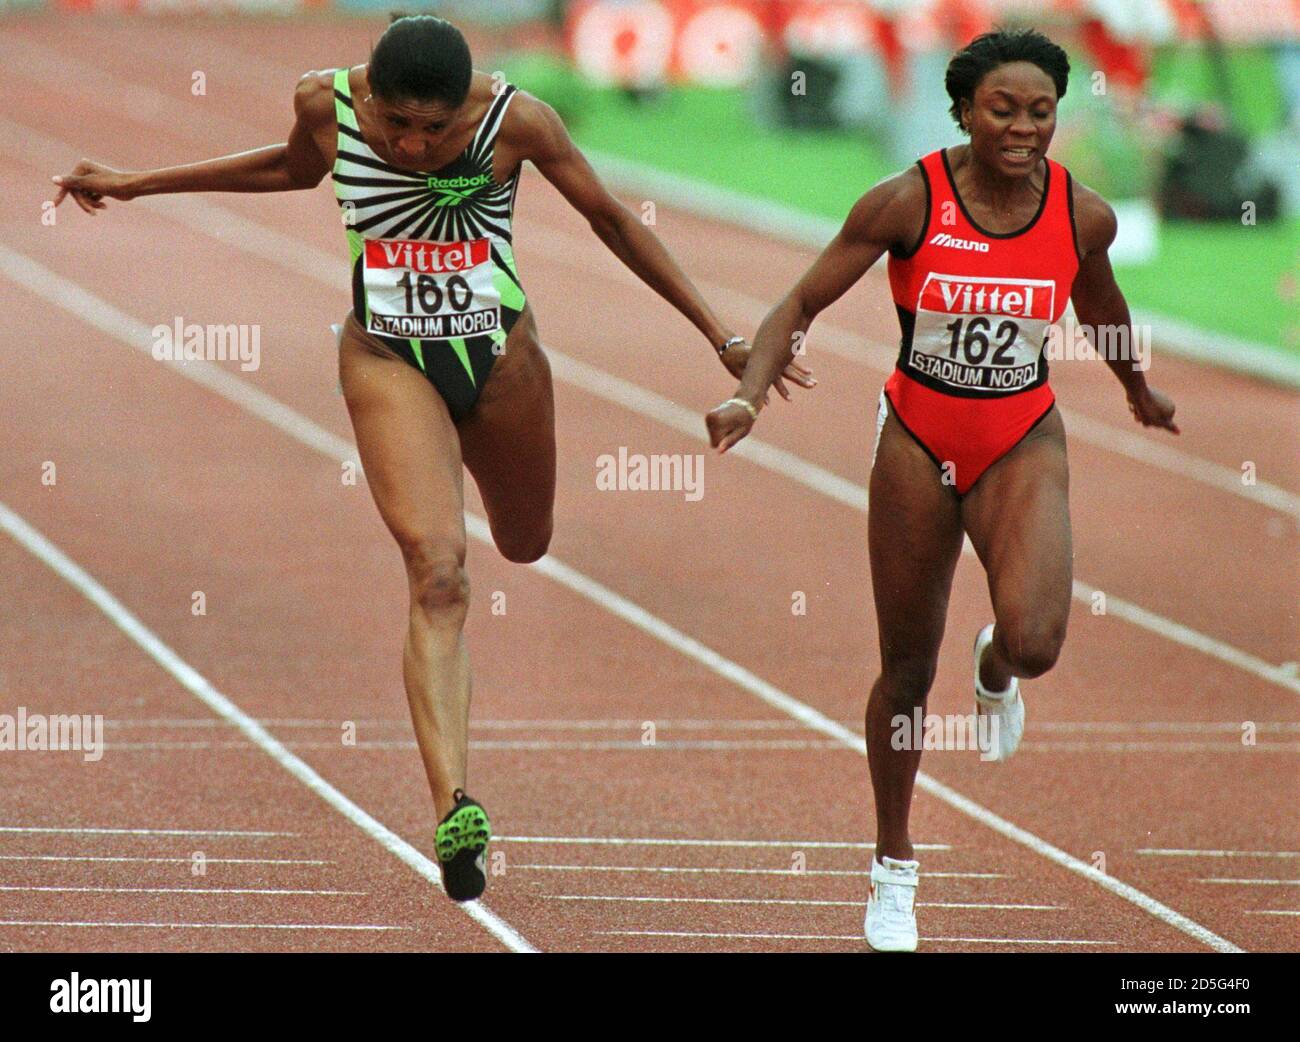 French Marie-Jose Perec (L), the women's 200 and 400 meters Olympic  champion, finishes behind Jamaican Juliet Cuthbert (R) at the 200 meters  race of the "Vittel Stadium meeting" in Villeneuve d'Ascq, northern